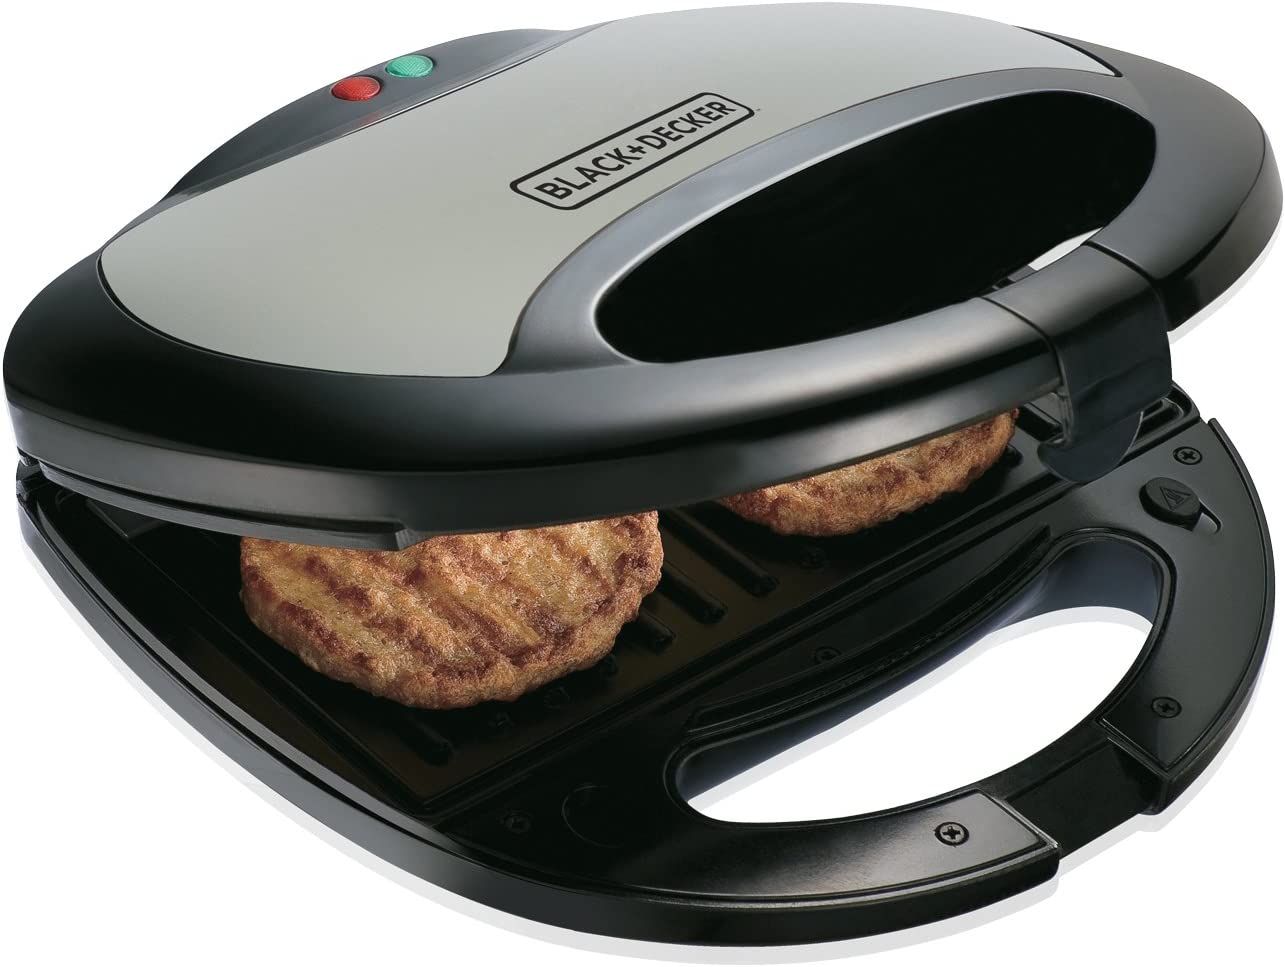 https://www.220stores.com/Shared/Images/Product/Black-And-Decker-TS2080-220-Volt-2-Slice-Sandwich-Maker-And-Grill-For-Export/TS2080-2.jpg